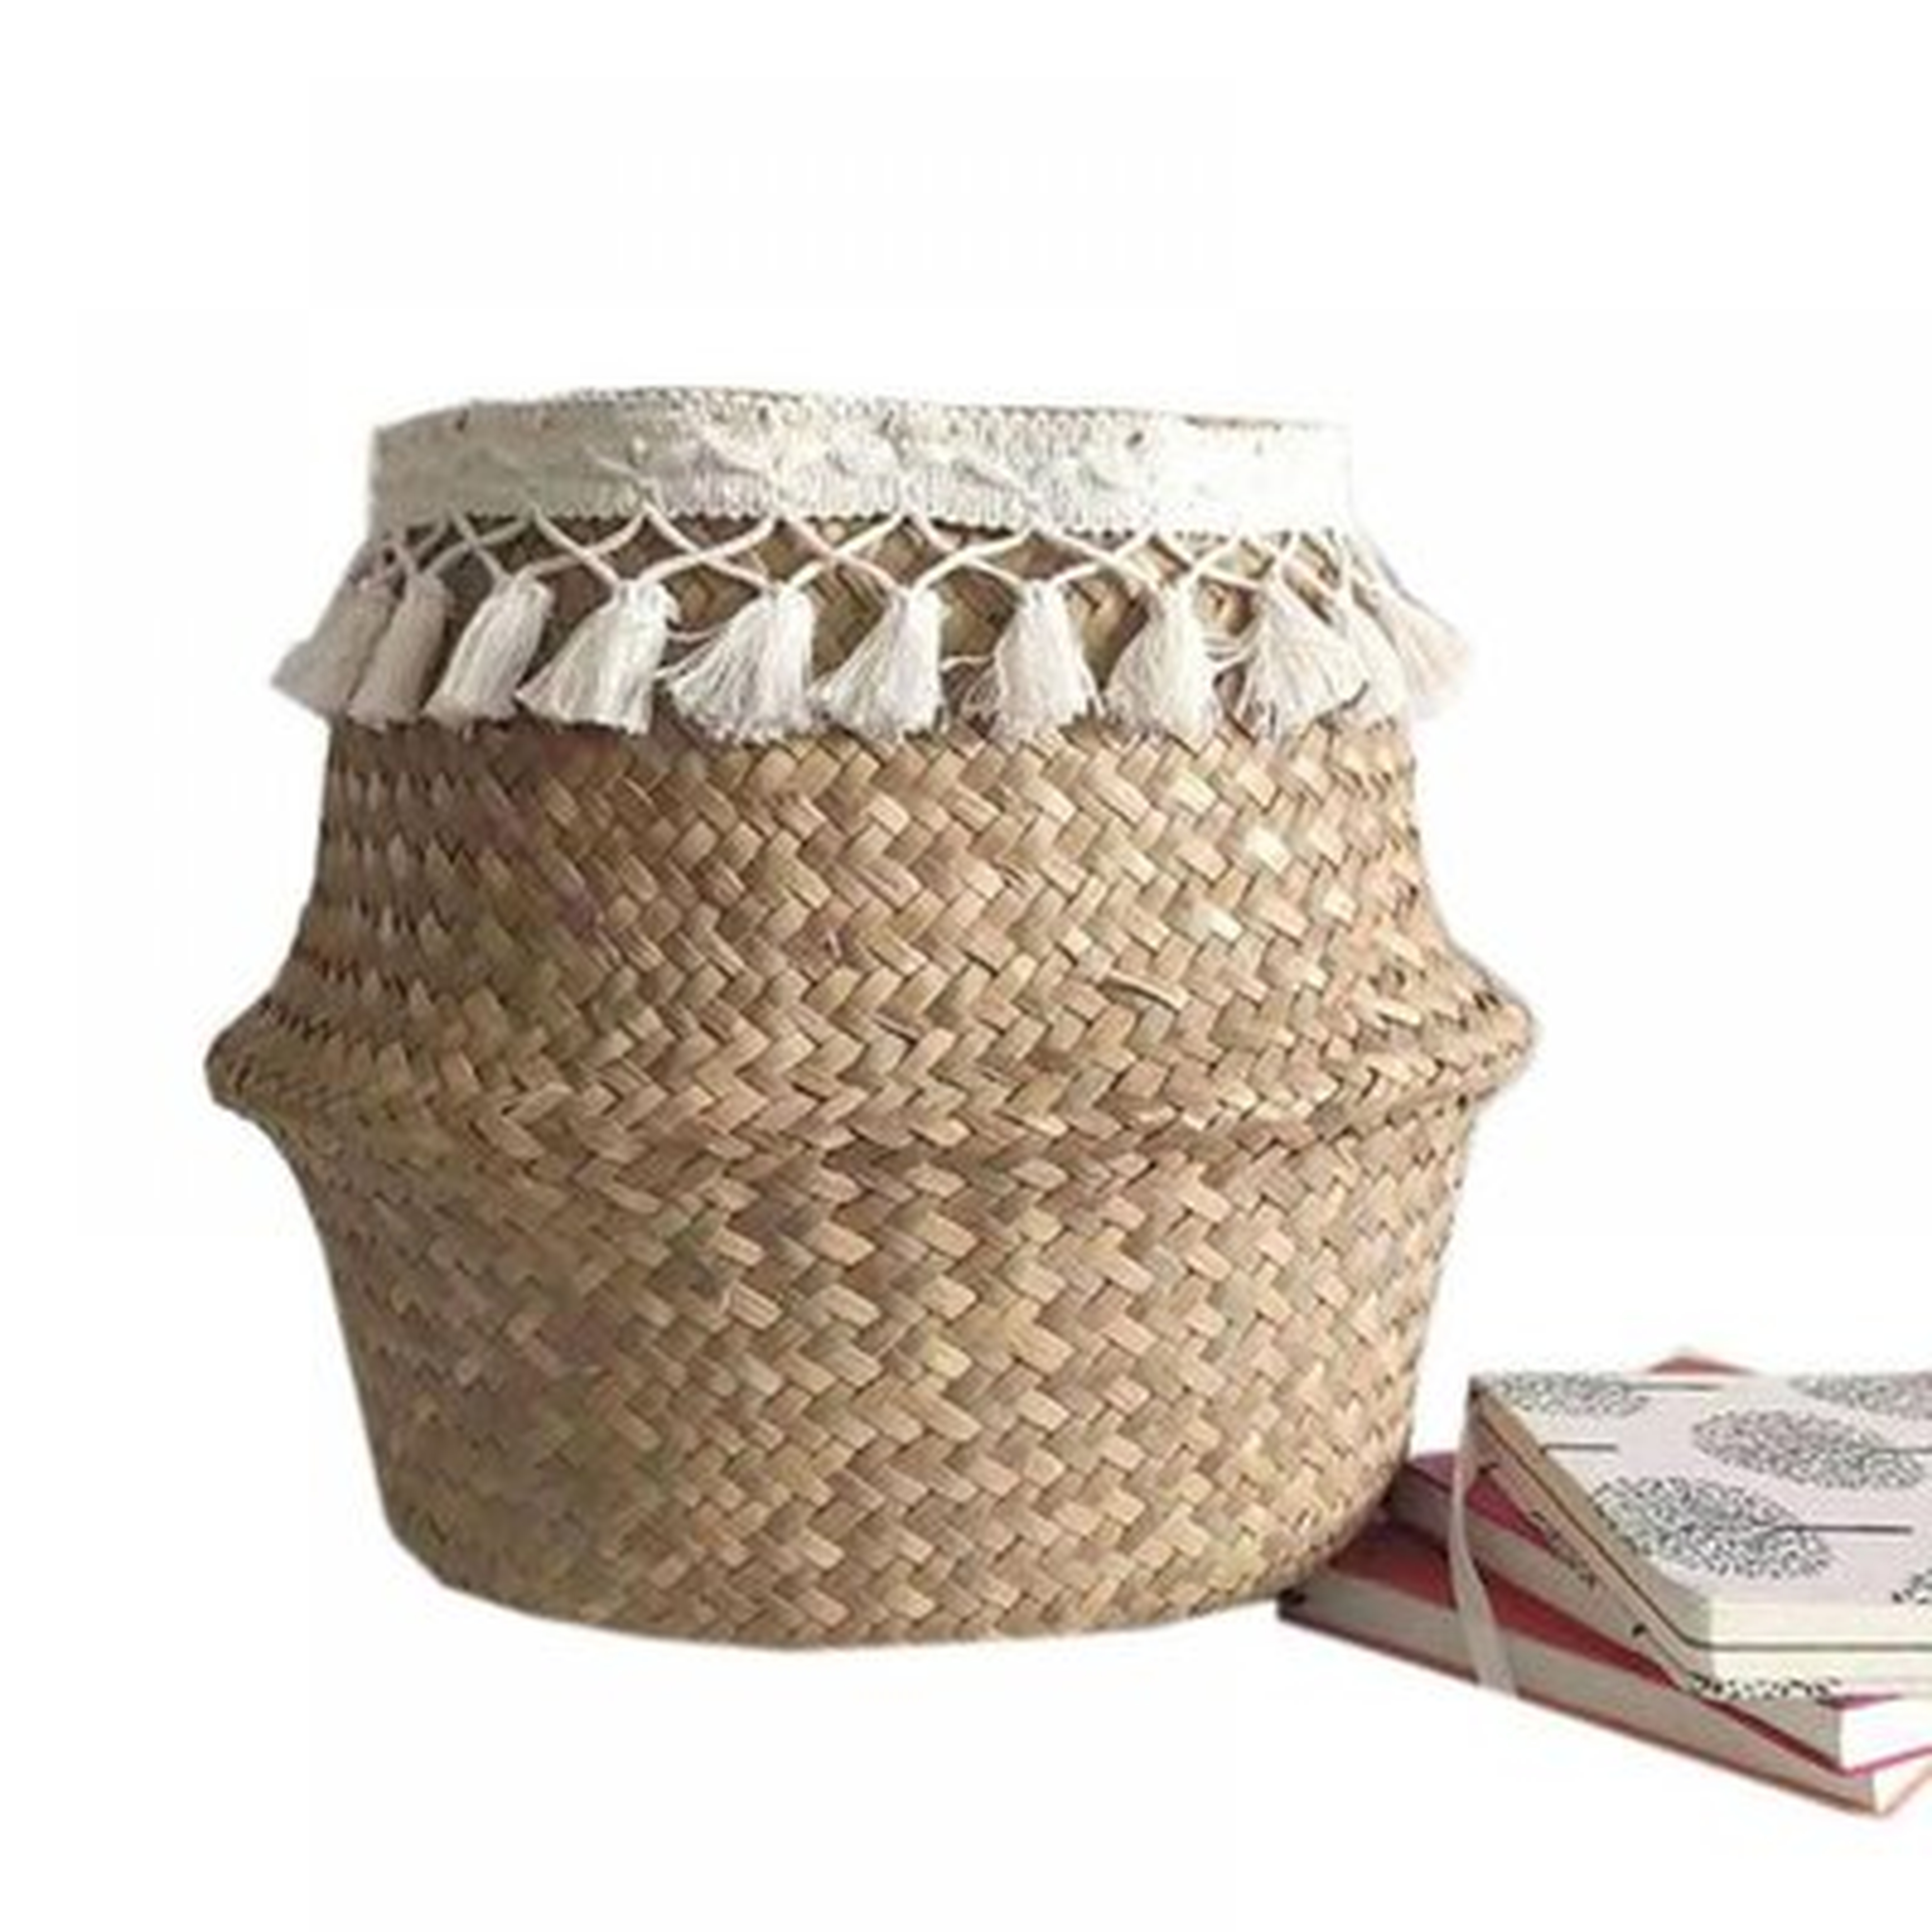 Woven Seagrass Belly Basket,Tassel Macrame Hand Woven Seagrass Belly Basket For Storage,Picnic,Plant Basin Cover,Groceries,Home Decor And Woven Straw Beach Bag - Wayfair